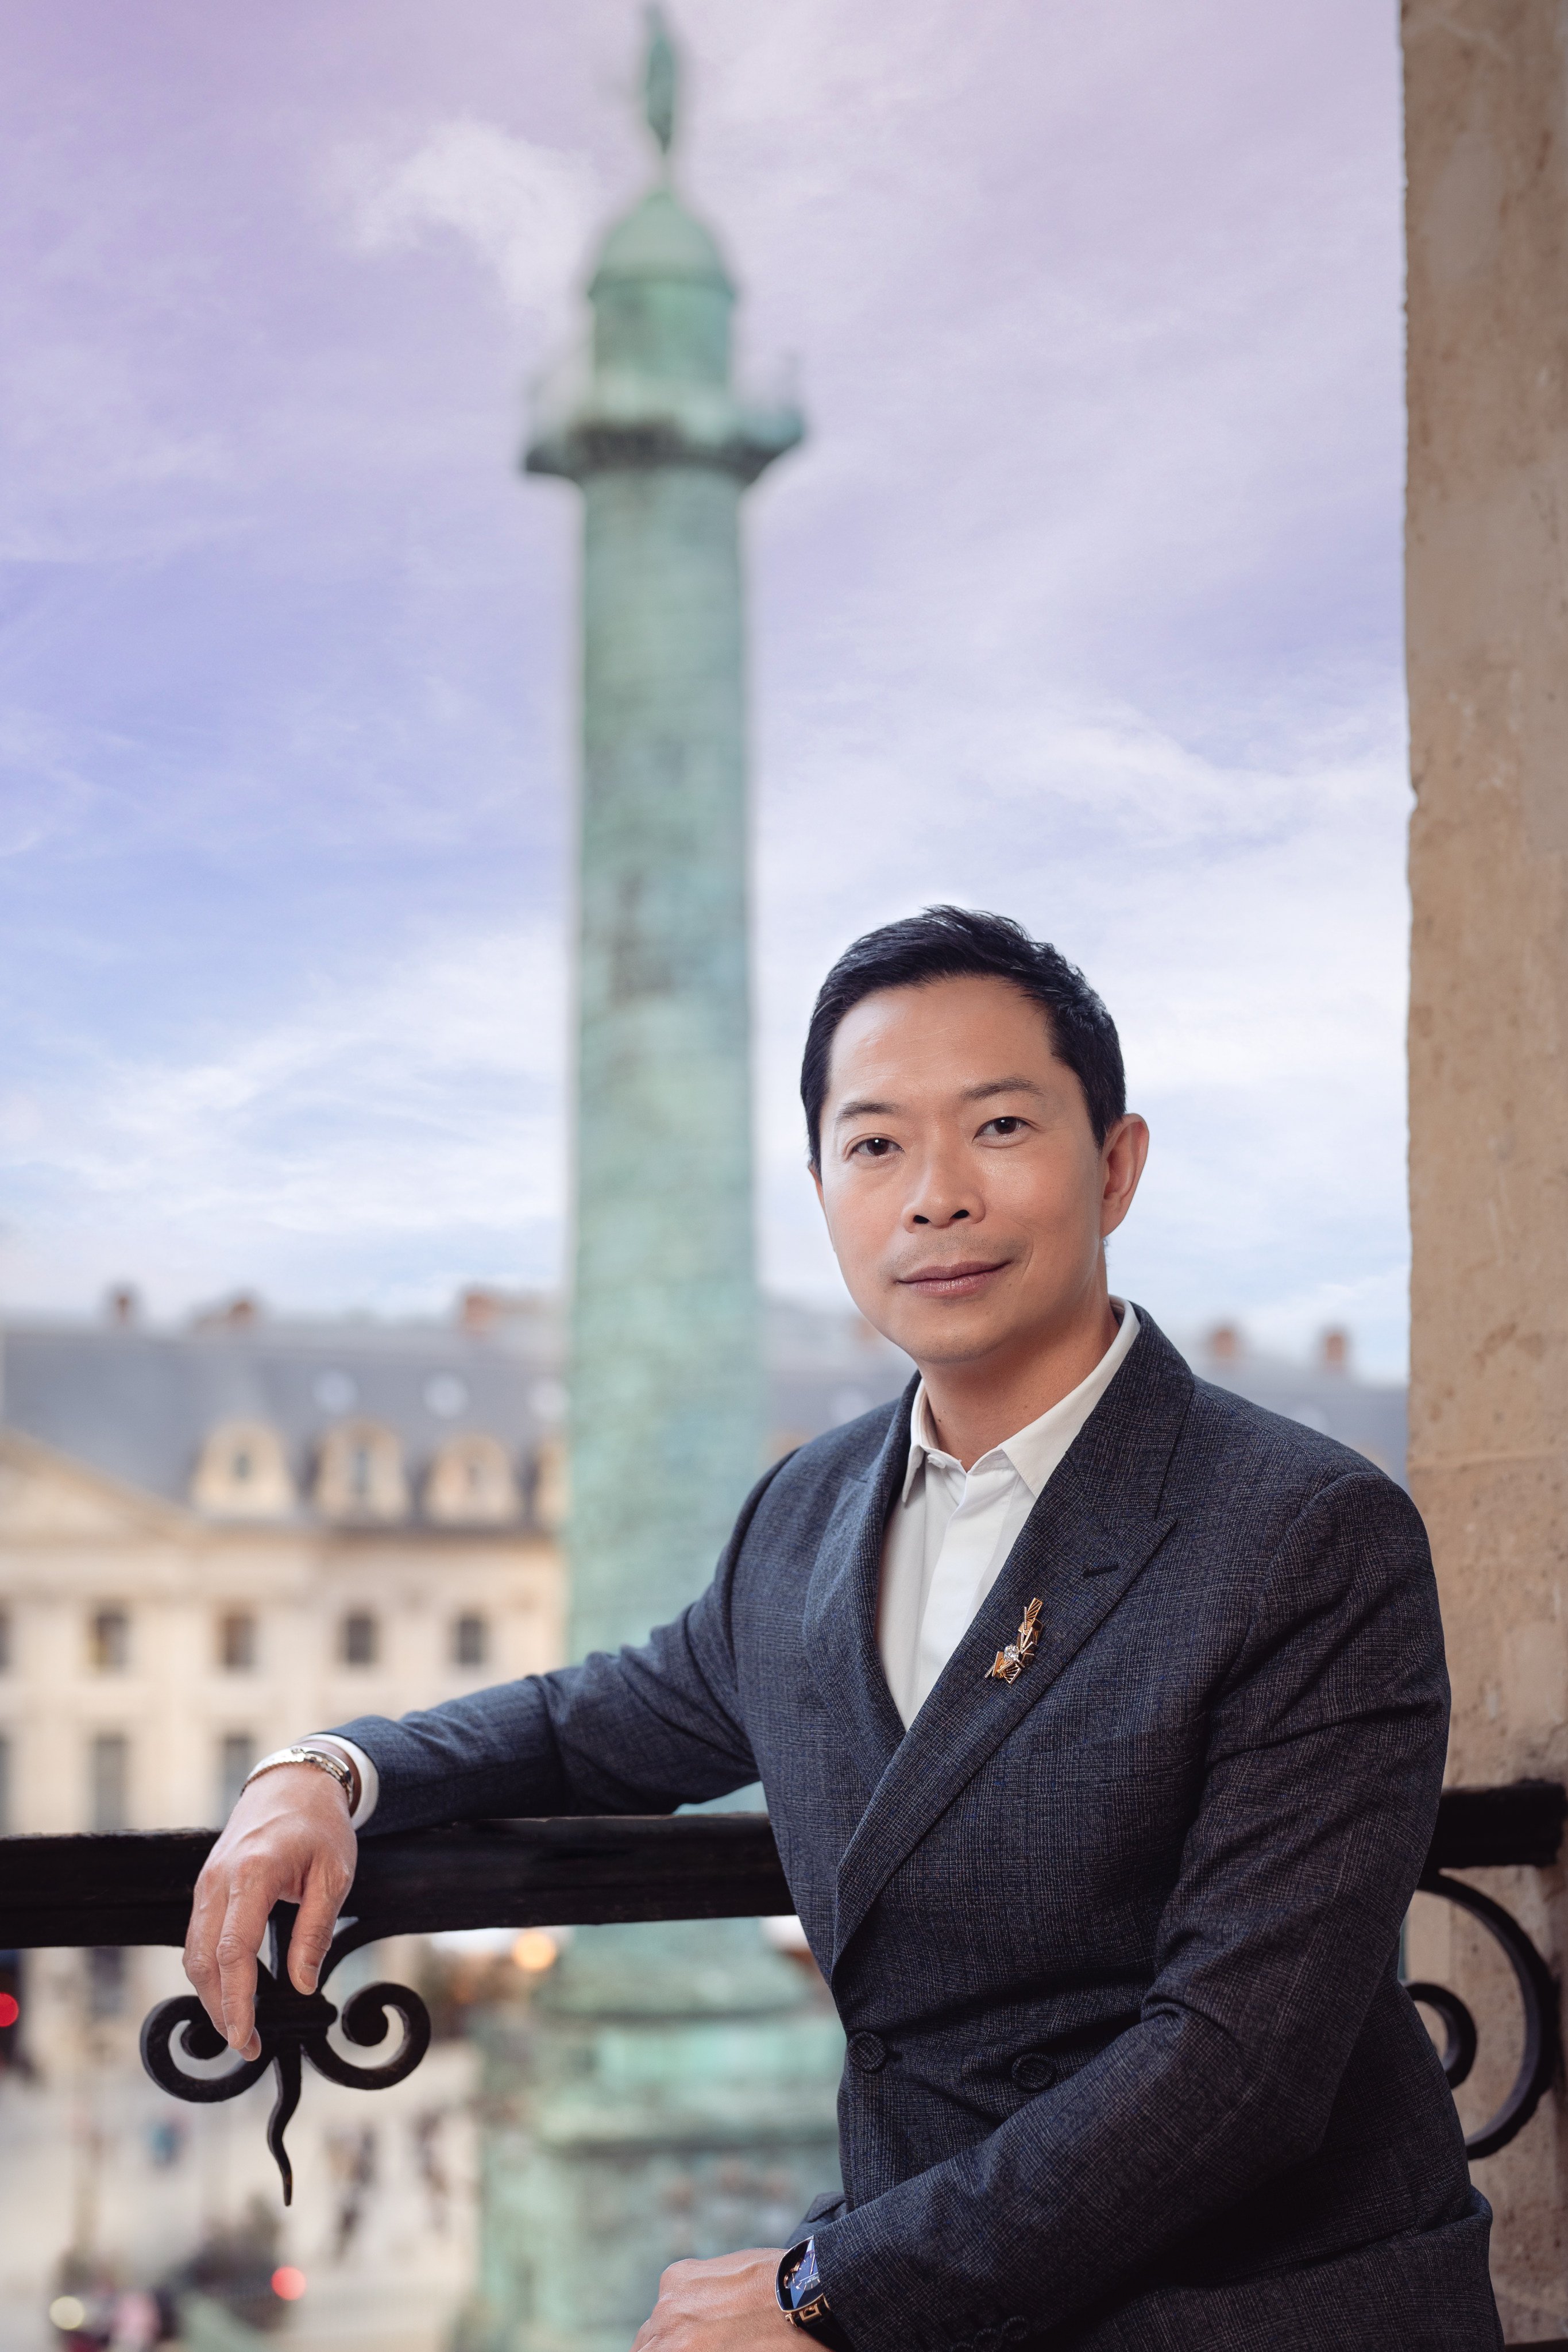 Chaumet made tiaras for Empress Josephine and other royals in centuries past, but today new CEO Charles Leung is excited about connecting with younger customers and new markets around the world. Photos: Handout